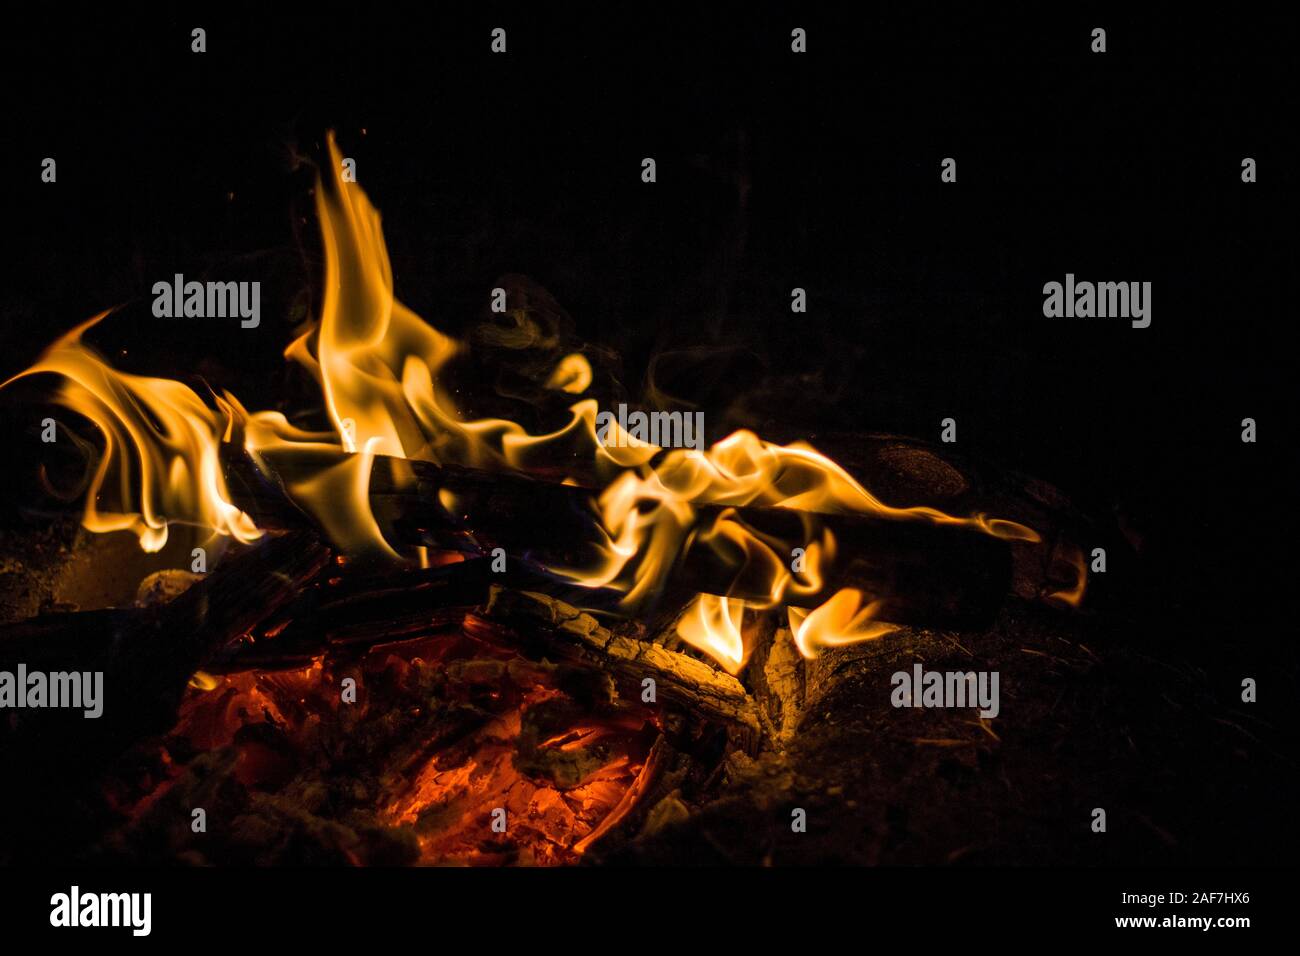 Isolated shot of small camp fire in the night. Stock Photo